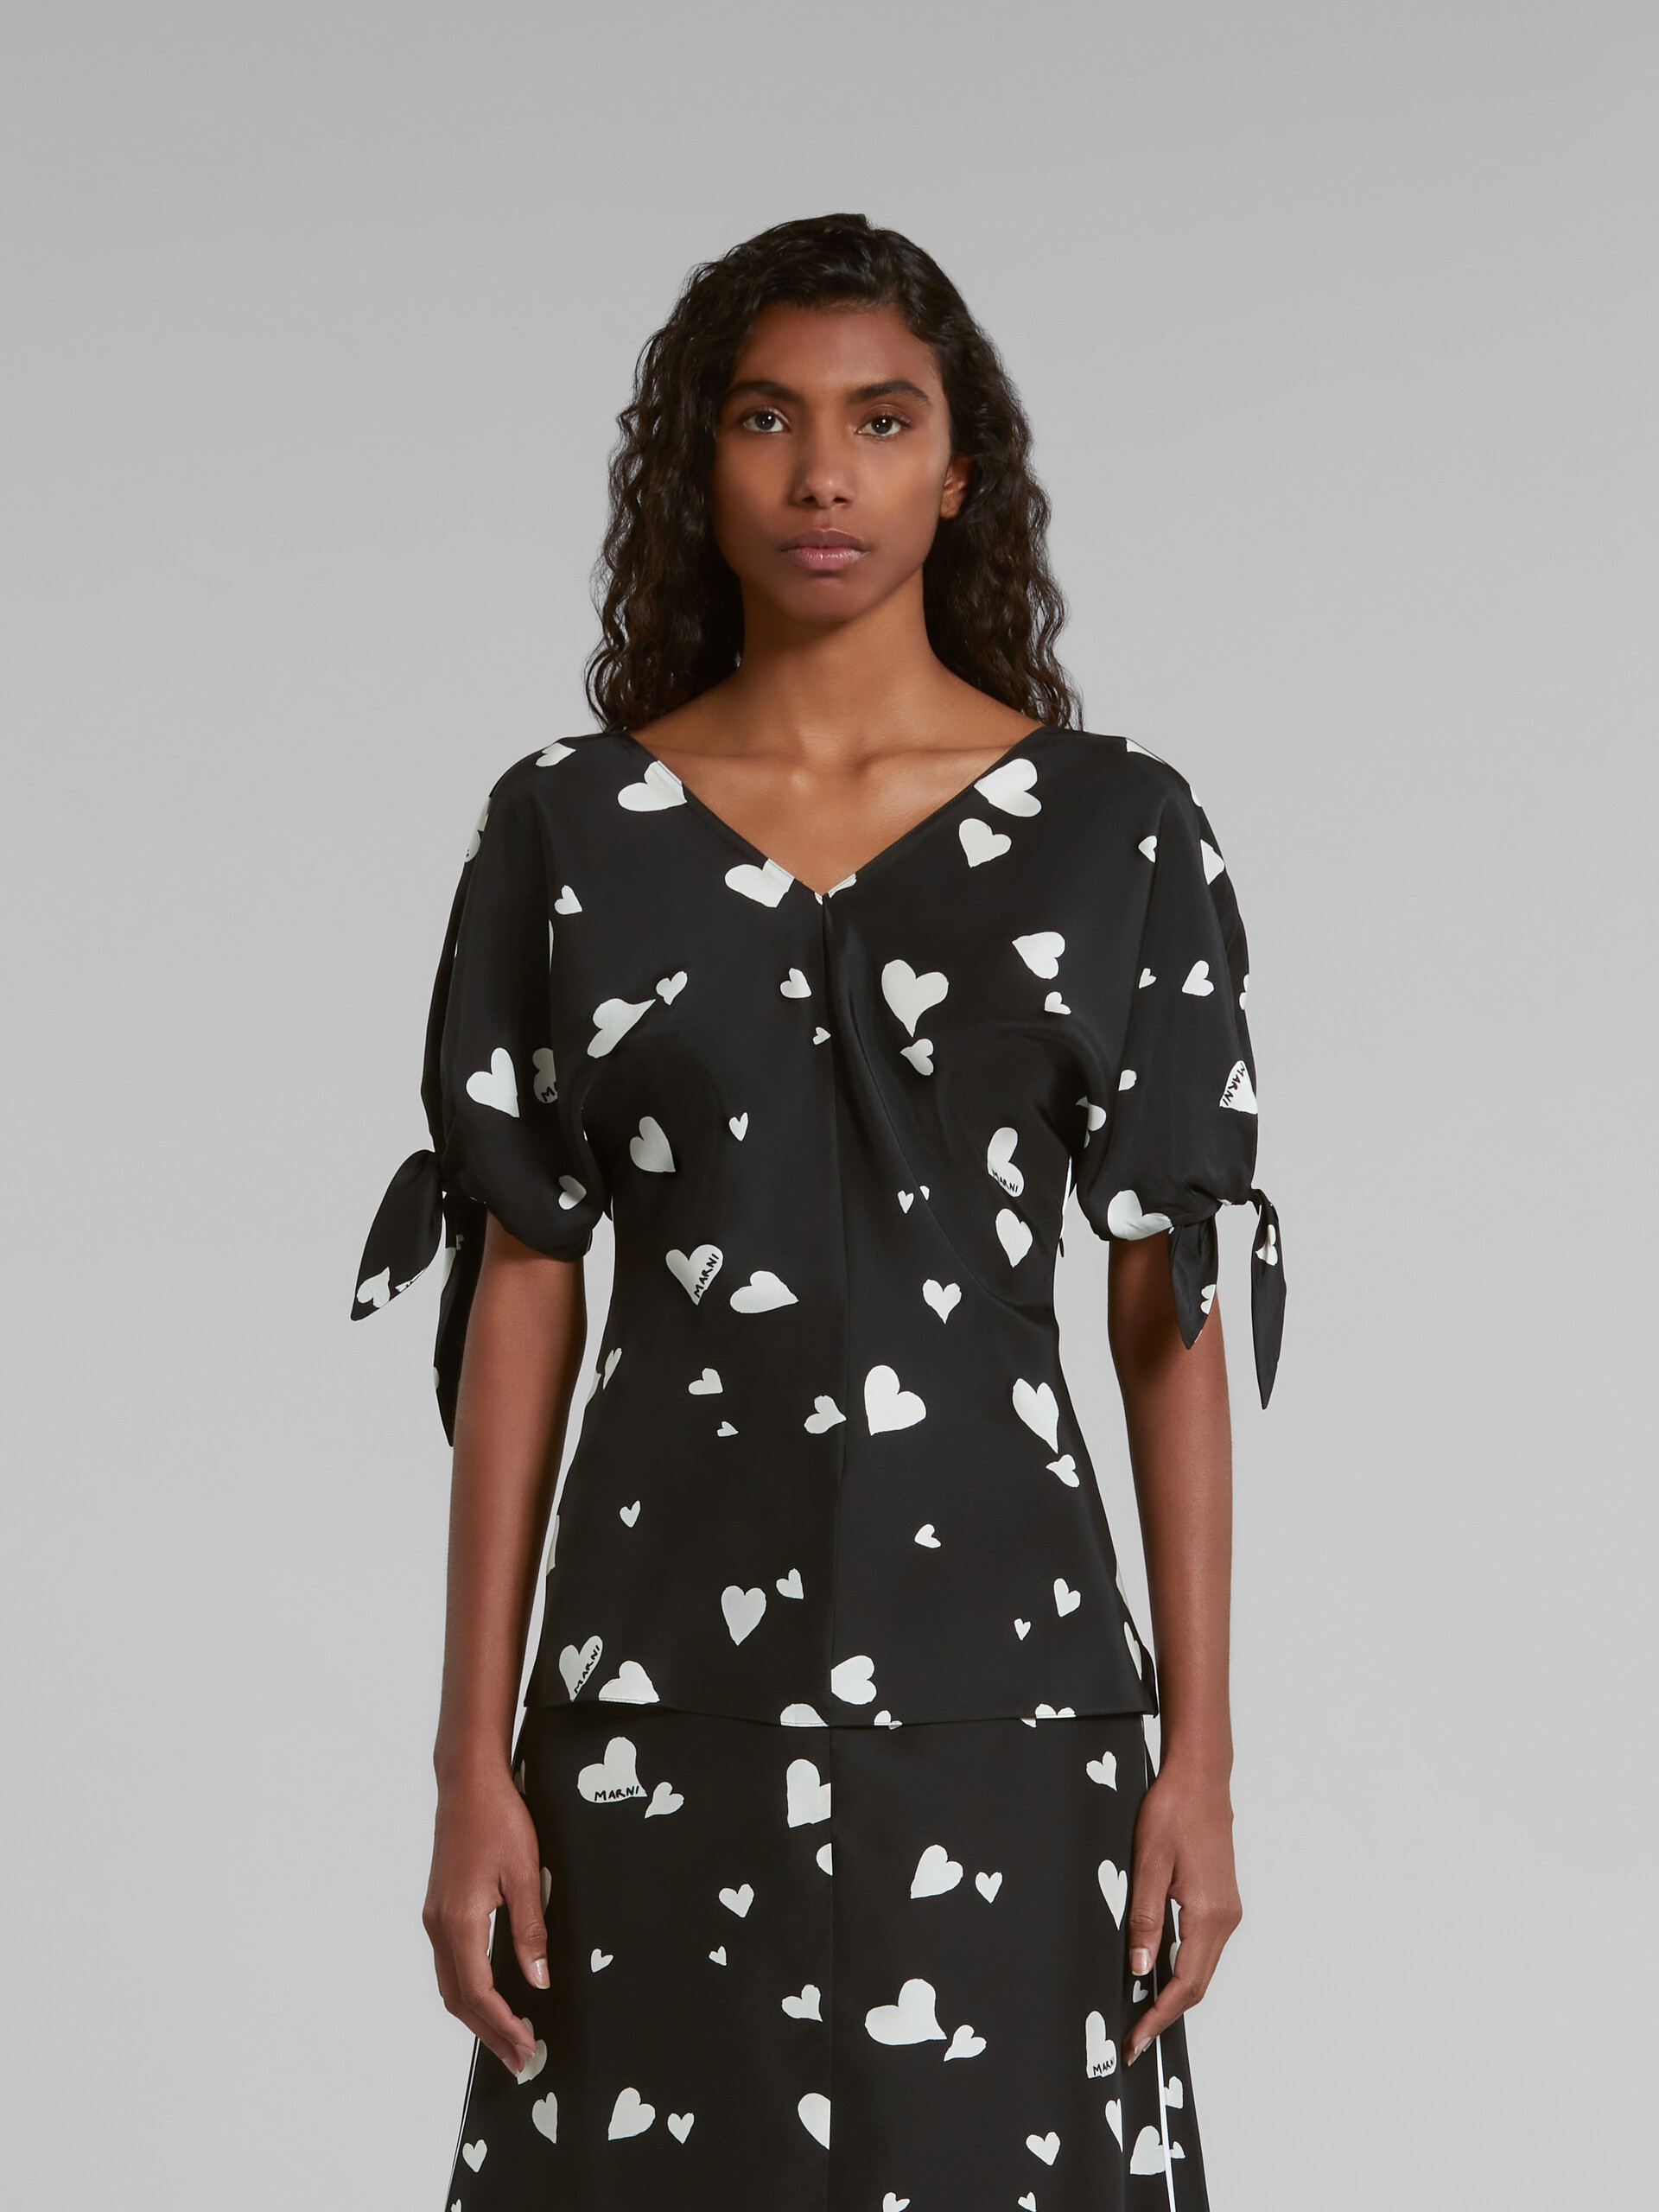 Black silk bow-sleeve top with Bunch of Hearts print - Shirts - Image 2